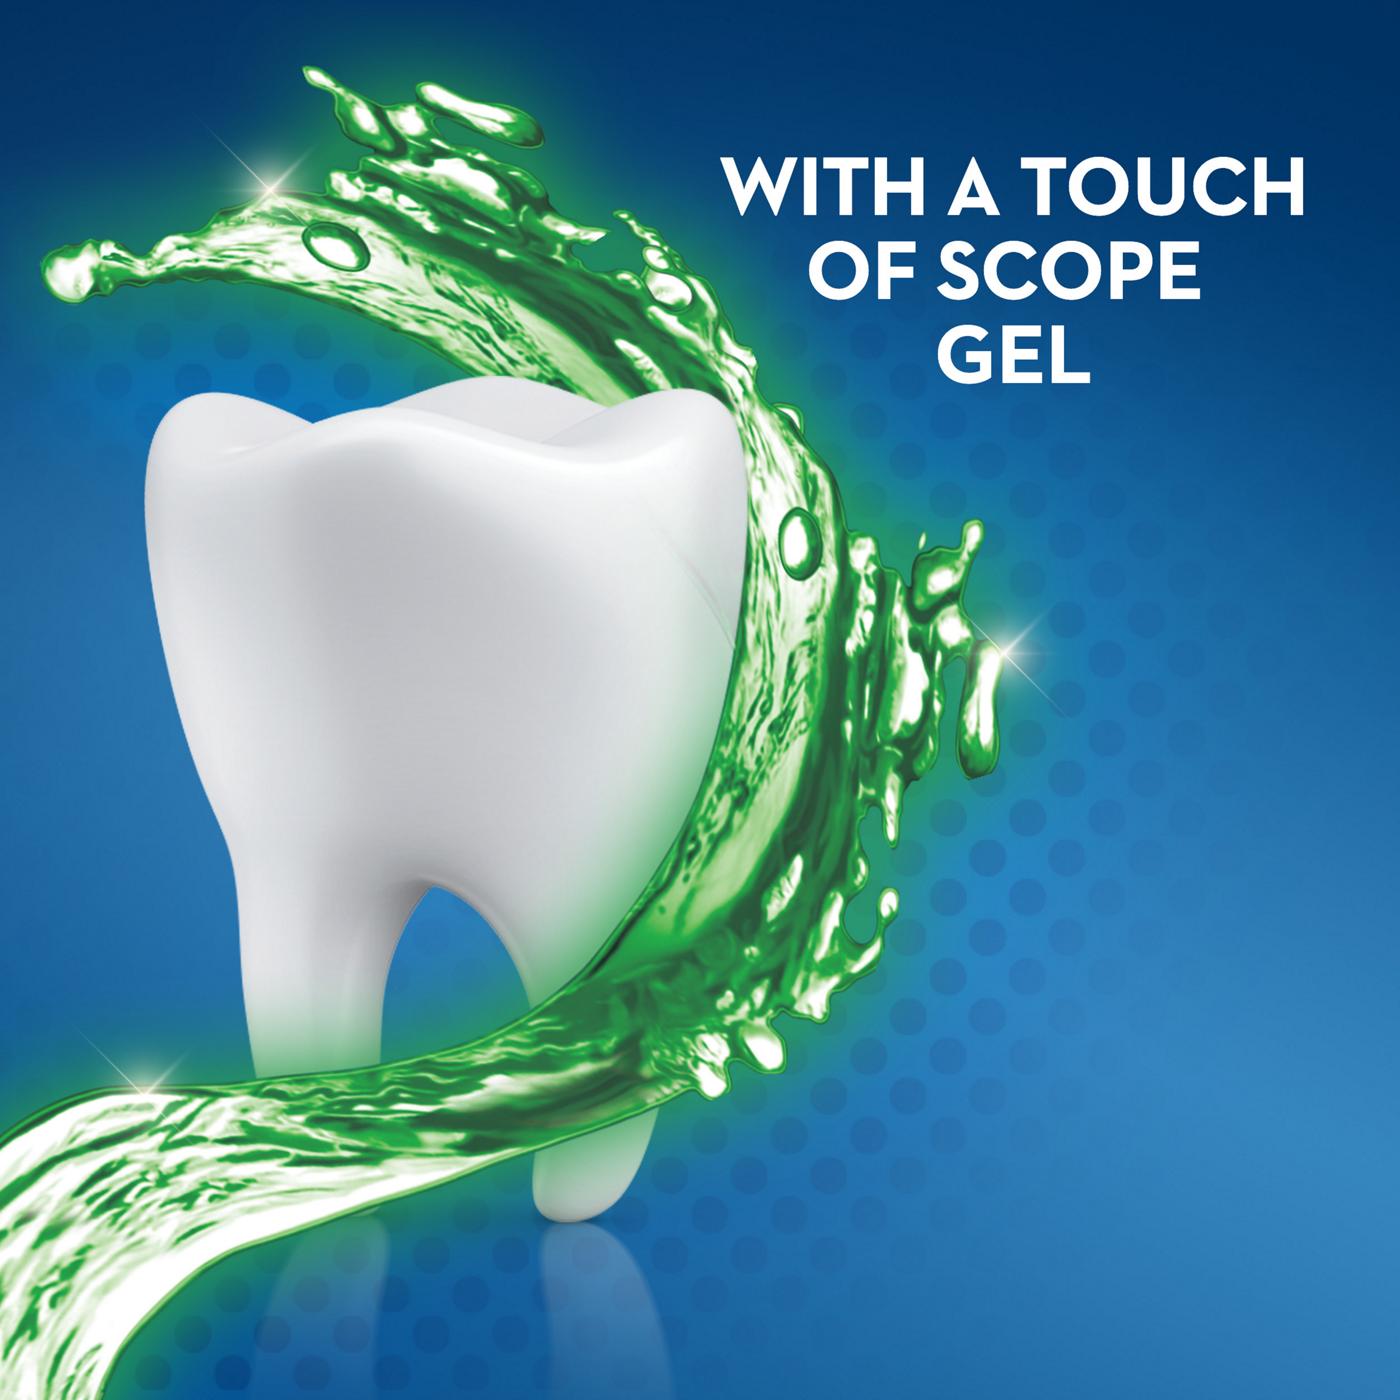 Crest Pro-Health with a Touch of Scope Gel Toothpaste; image 9 of 10